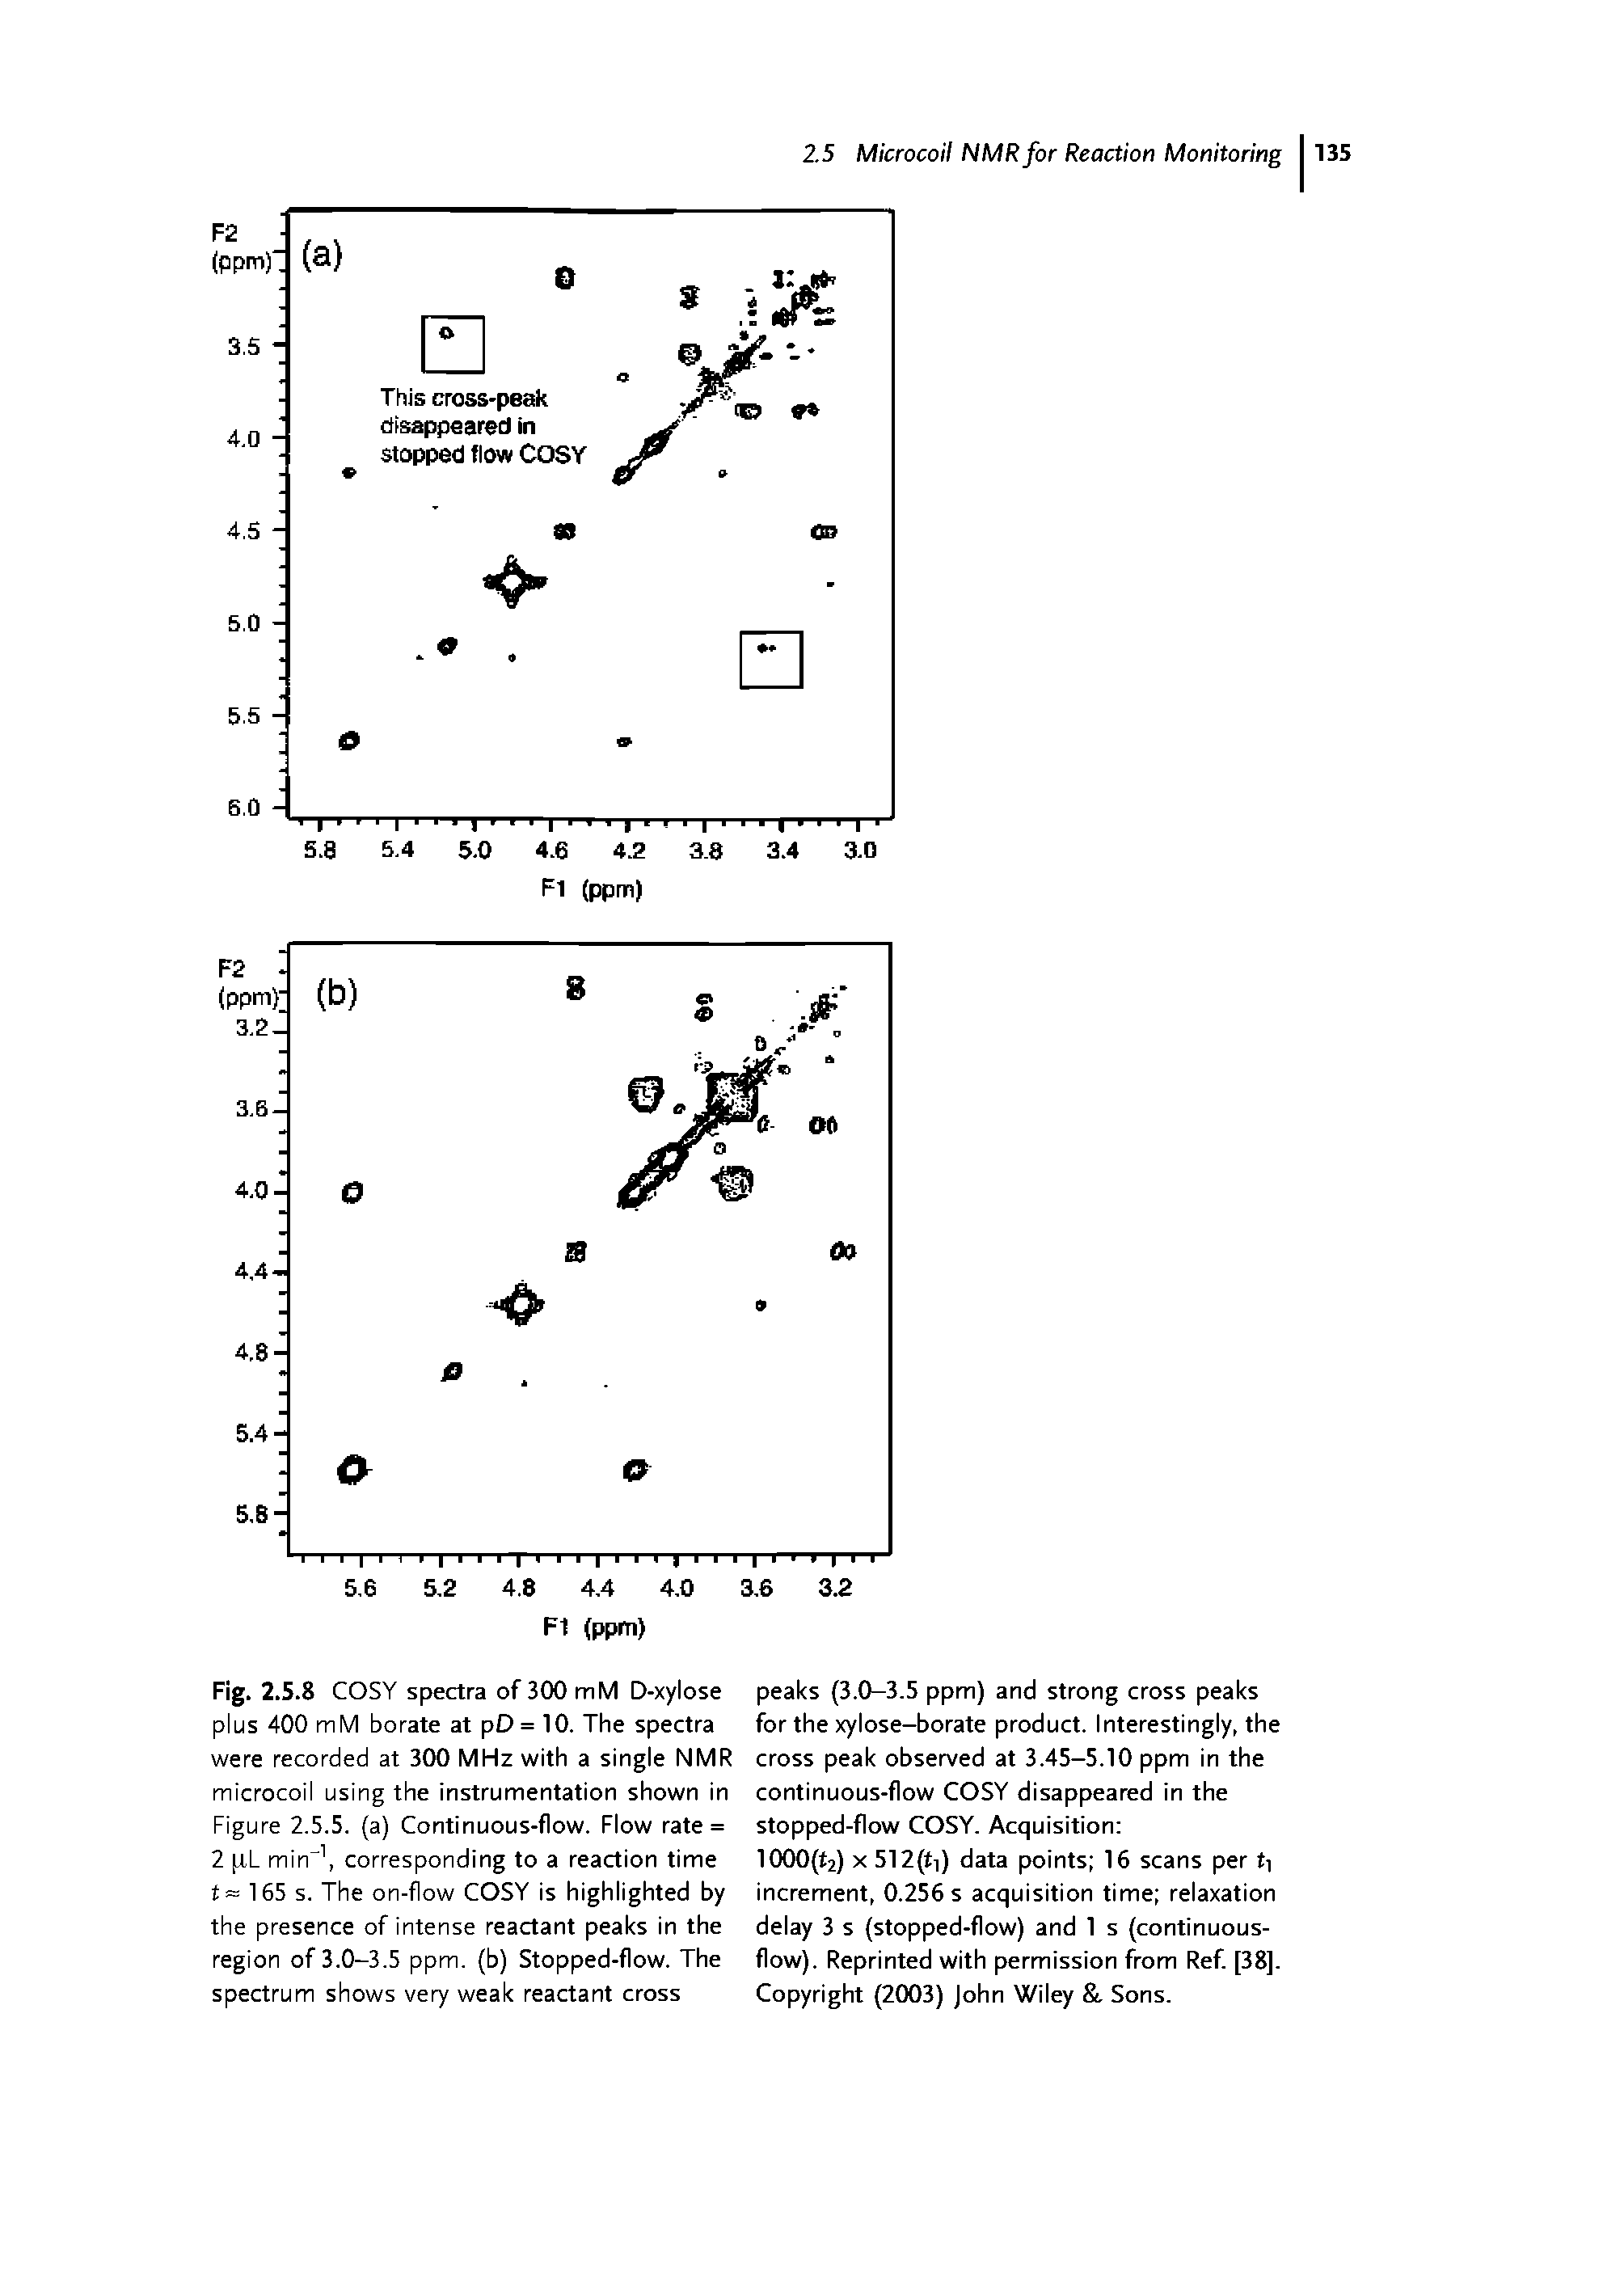 Fig. 2.5.8 COSY spectra of 300 mM D-xylose plus 400 mM borate at pD = 10. The spectra were recorded at 300 MHz with a single NMR microcoil using the instrumentation shown in Figure 2.5.5. (a) Continuous-flow. Flow rate = 2 pL min-1, corresponding to a reaction time t 165 s. The on-flow COSY is highlighted by the presence of intense reactant peaks in the region of 3.0-3.5 ppm. (b) Stopped-flow. The spectrum shows very weak reactant cross...